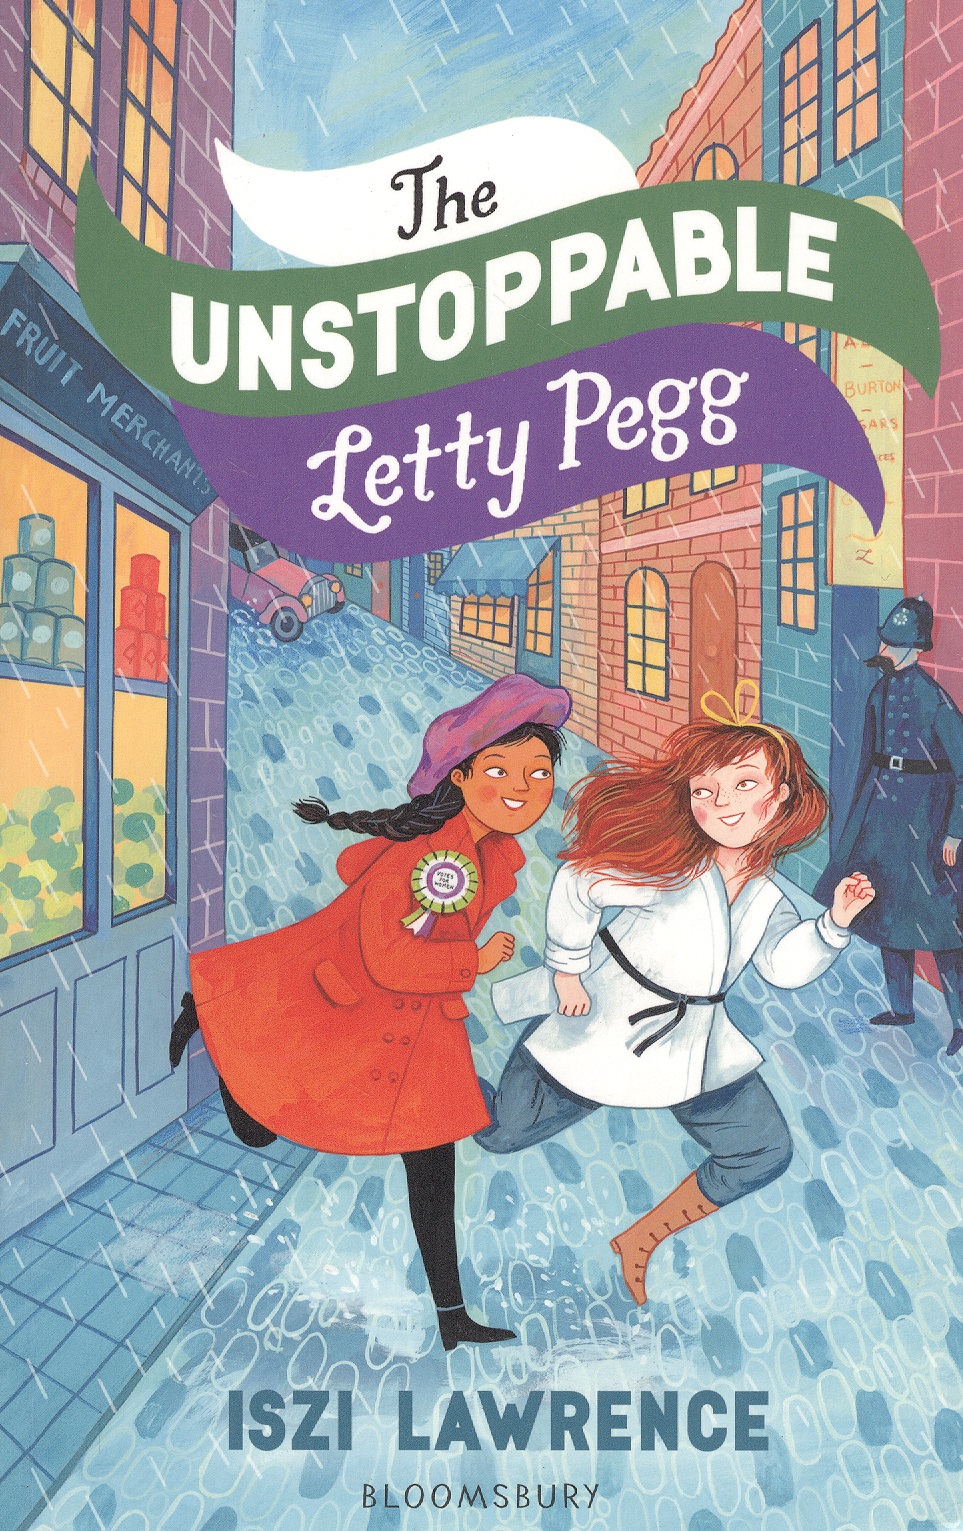 the suffragettes Lawrence Iszi The Unstoppable Letty Pegg